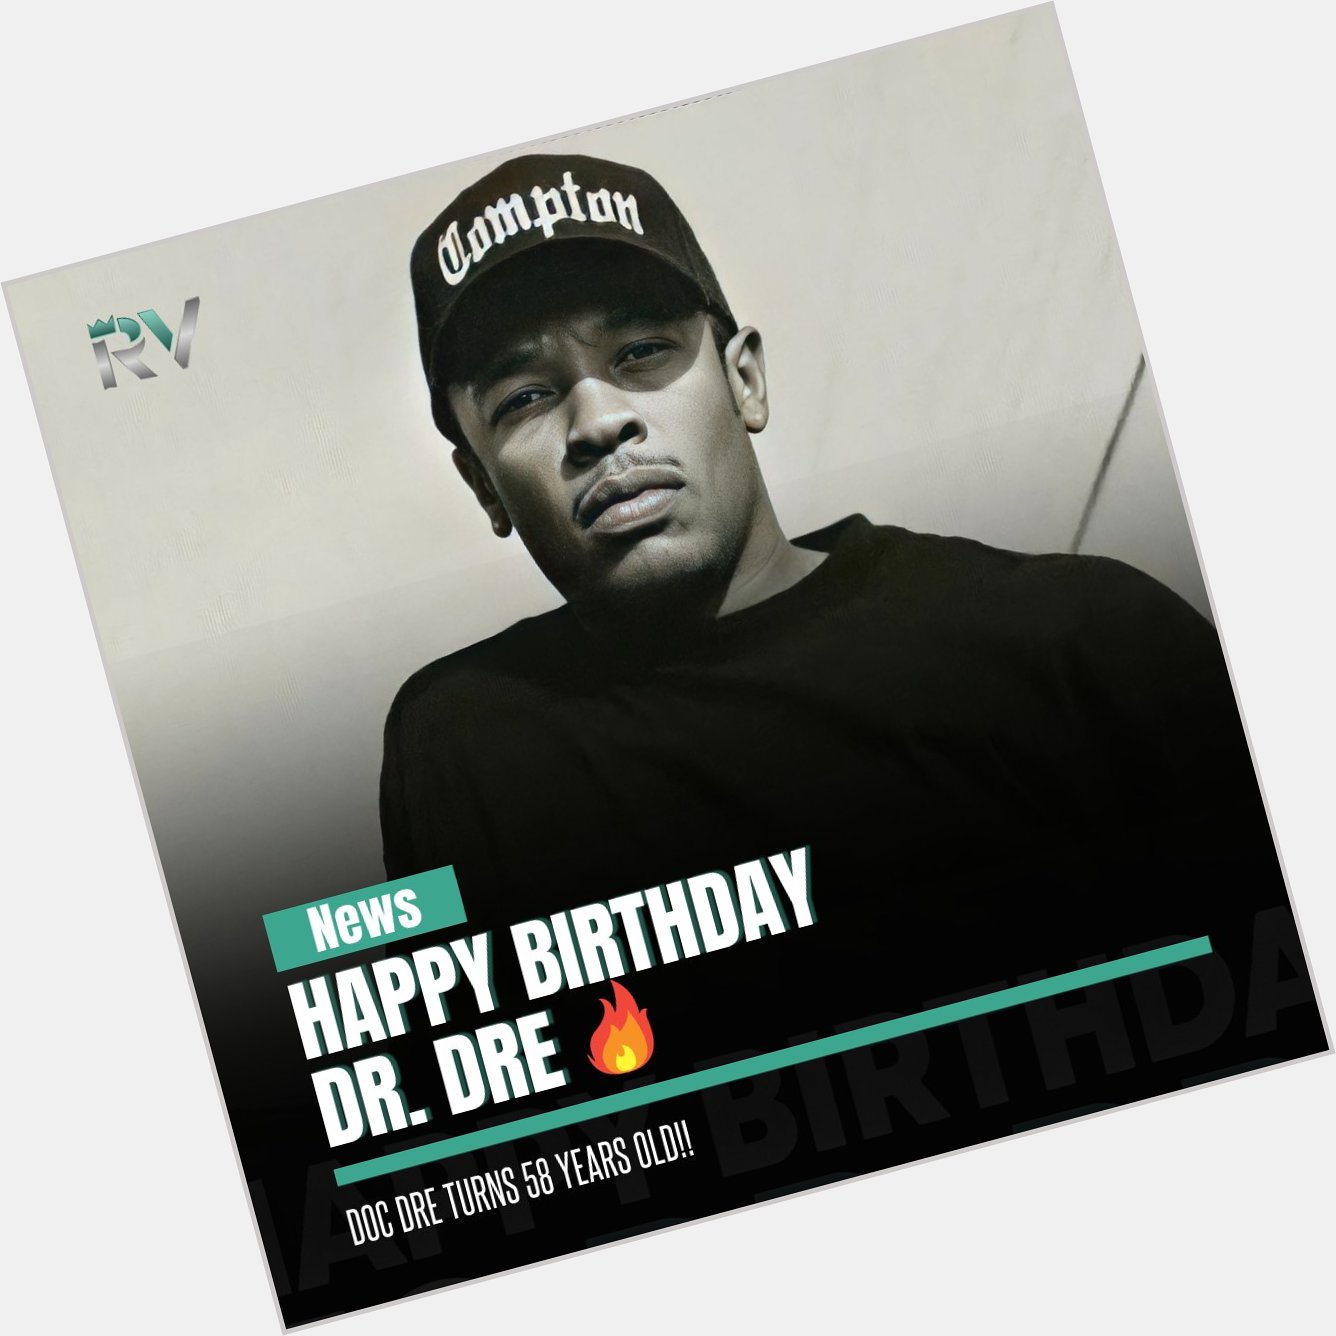 Happy 58th birthday to one of the greatest of all time Dr. Dre    